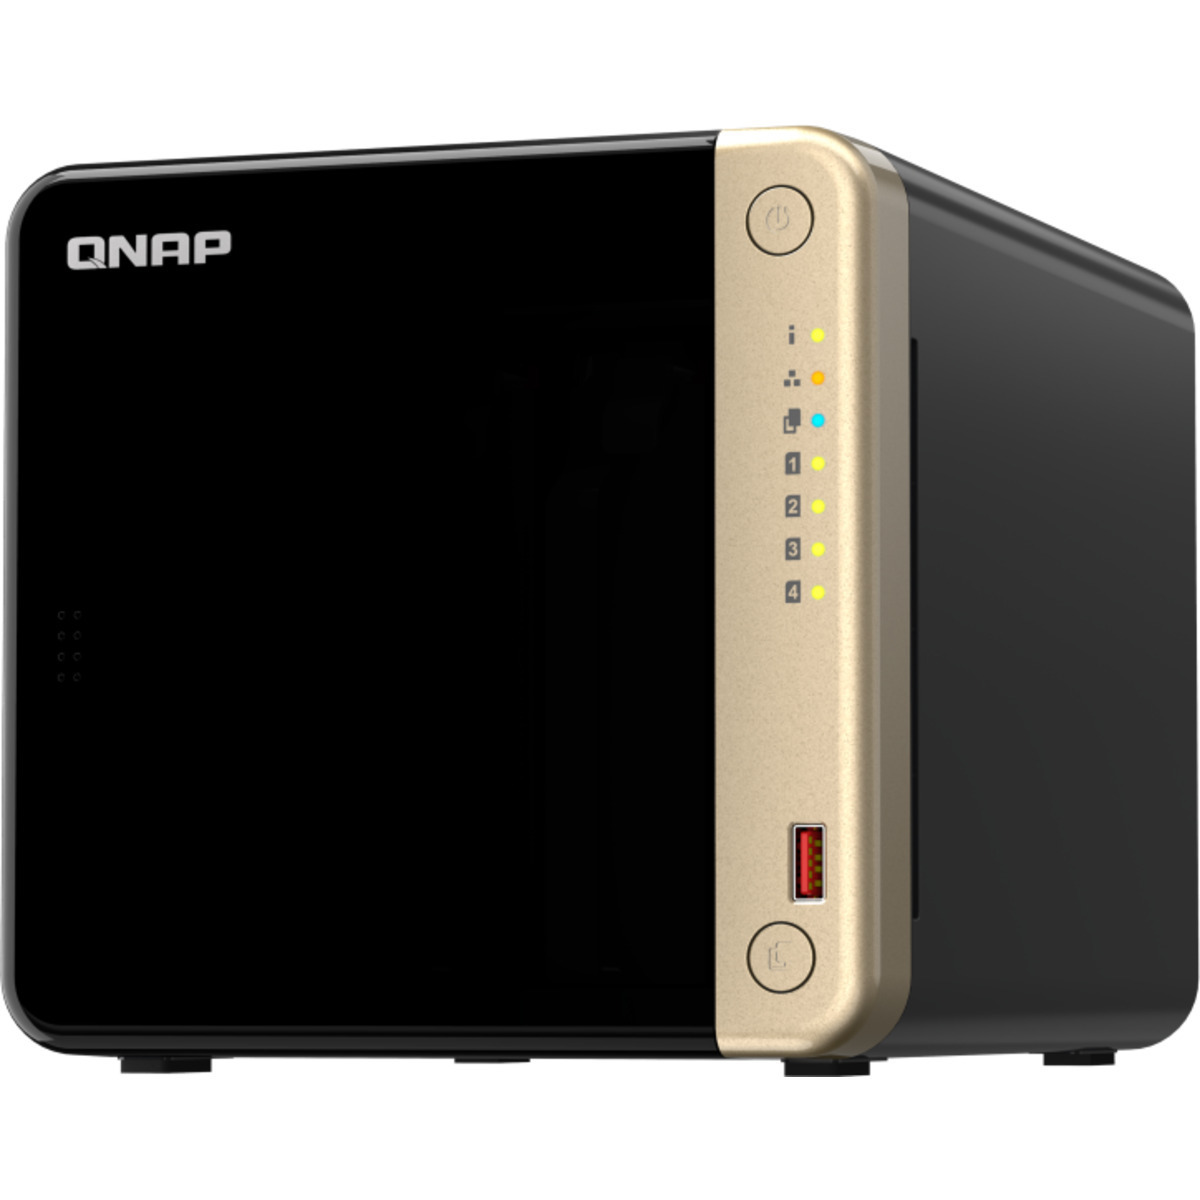 QNAP TS-464 96tb 4-Bay Desktop Multimedia / Power User / Business NAS - Network Attached Storage Device 4x24tb Seagate EXOS X24 ST24000NM002H 3.5 7200rpm SATA 6Gb/s HDD ENTERPRISE Class Drives Installed - Burn-In Tested TS-464